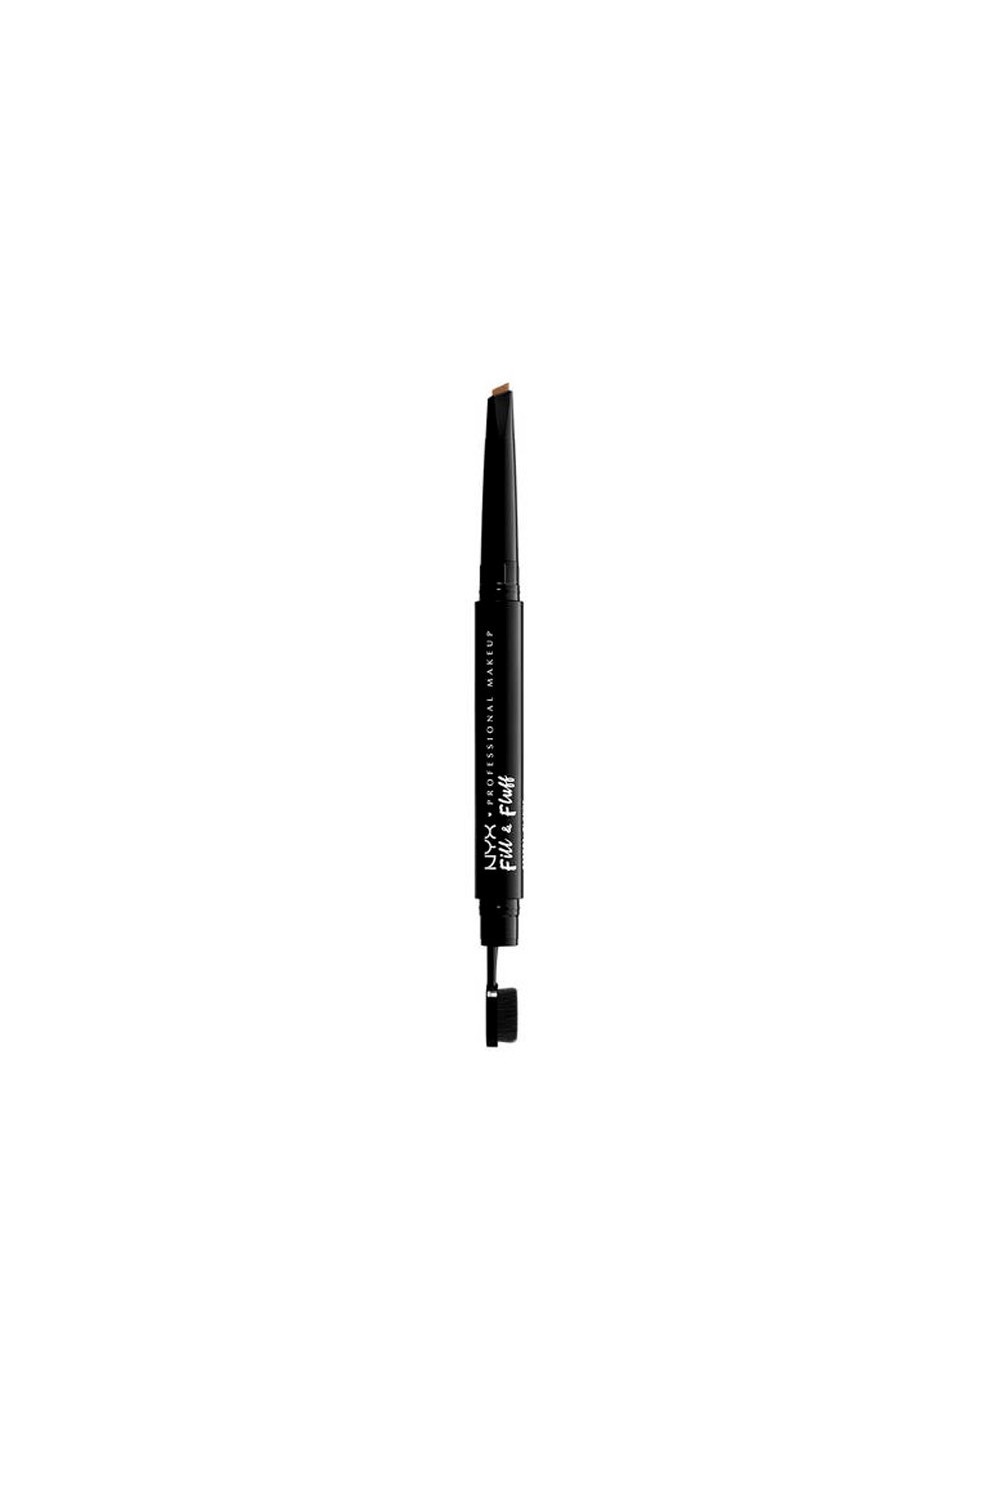 Nyx Fill & Fluff Eyebrow Pomade Pencil Taupe 15g